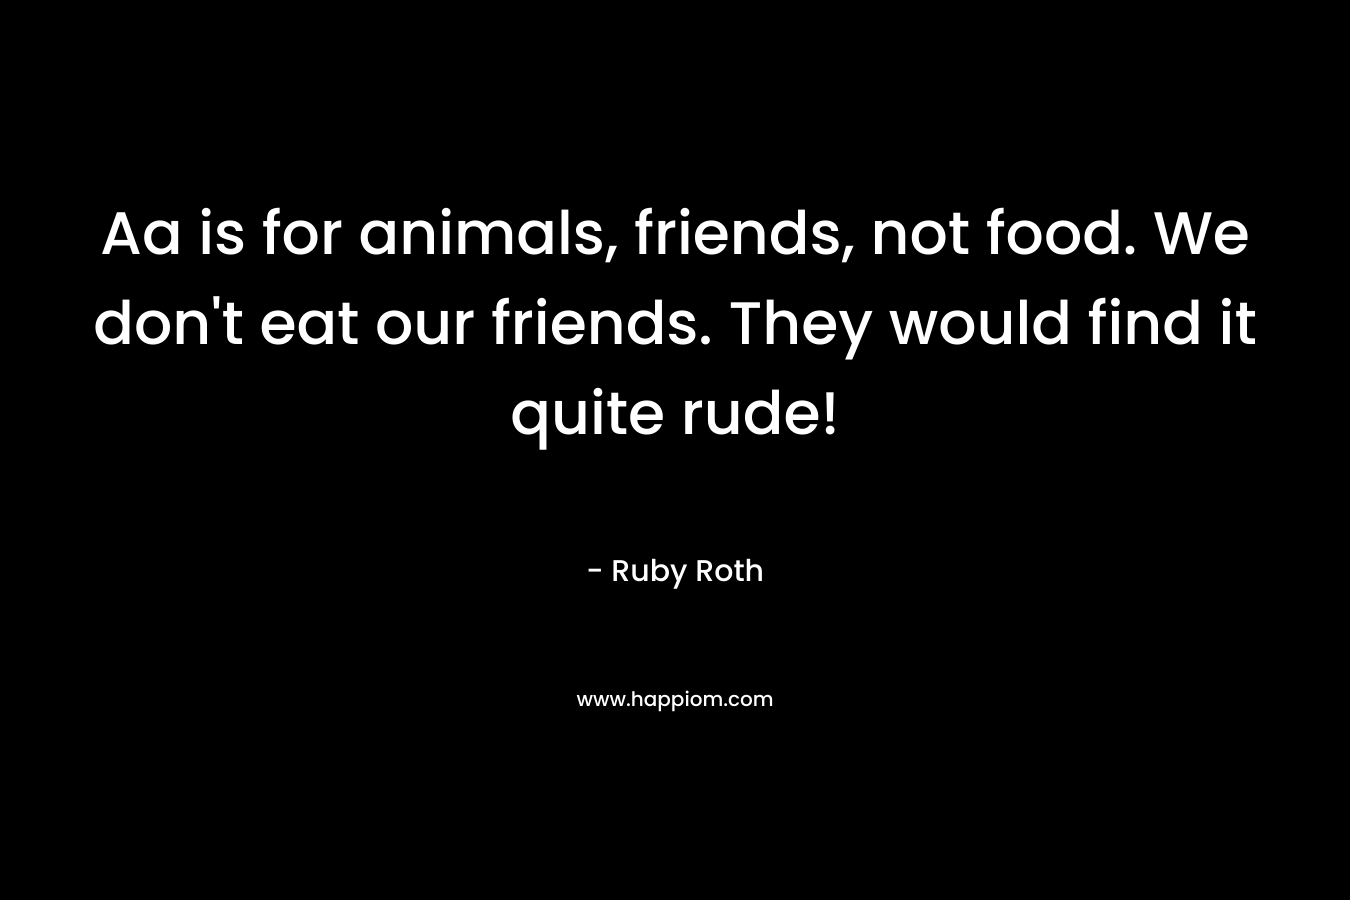 Aa is for animals, friends, not food. We don't eat our friends. They would find it quite rude!